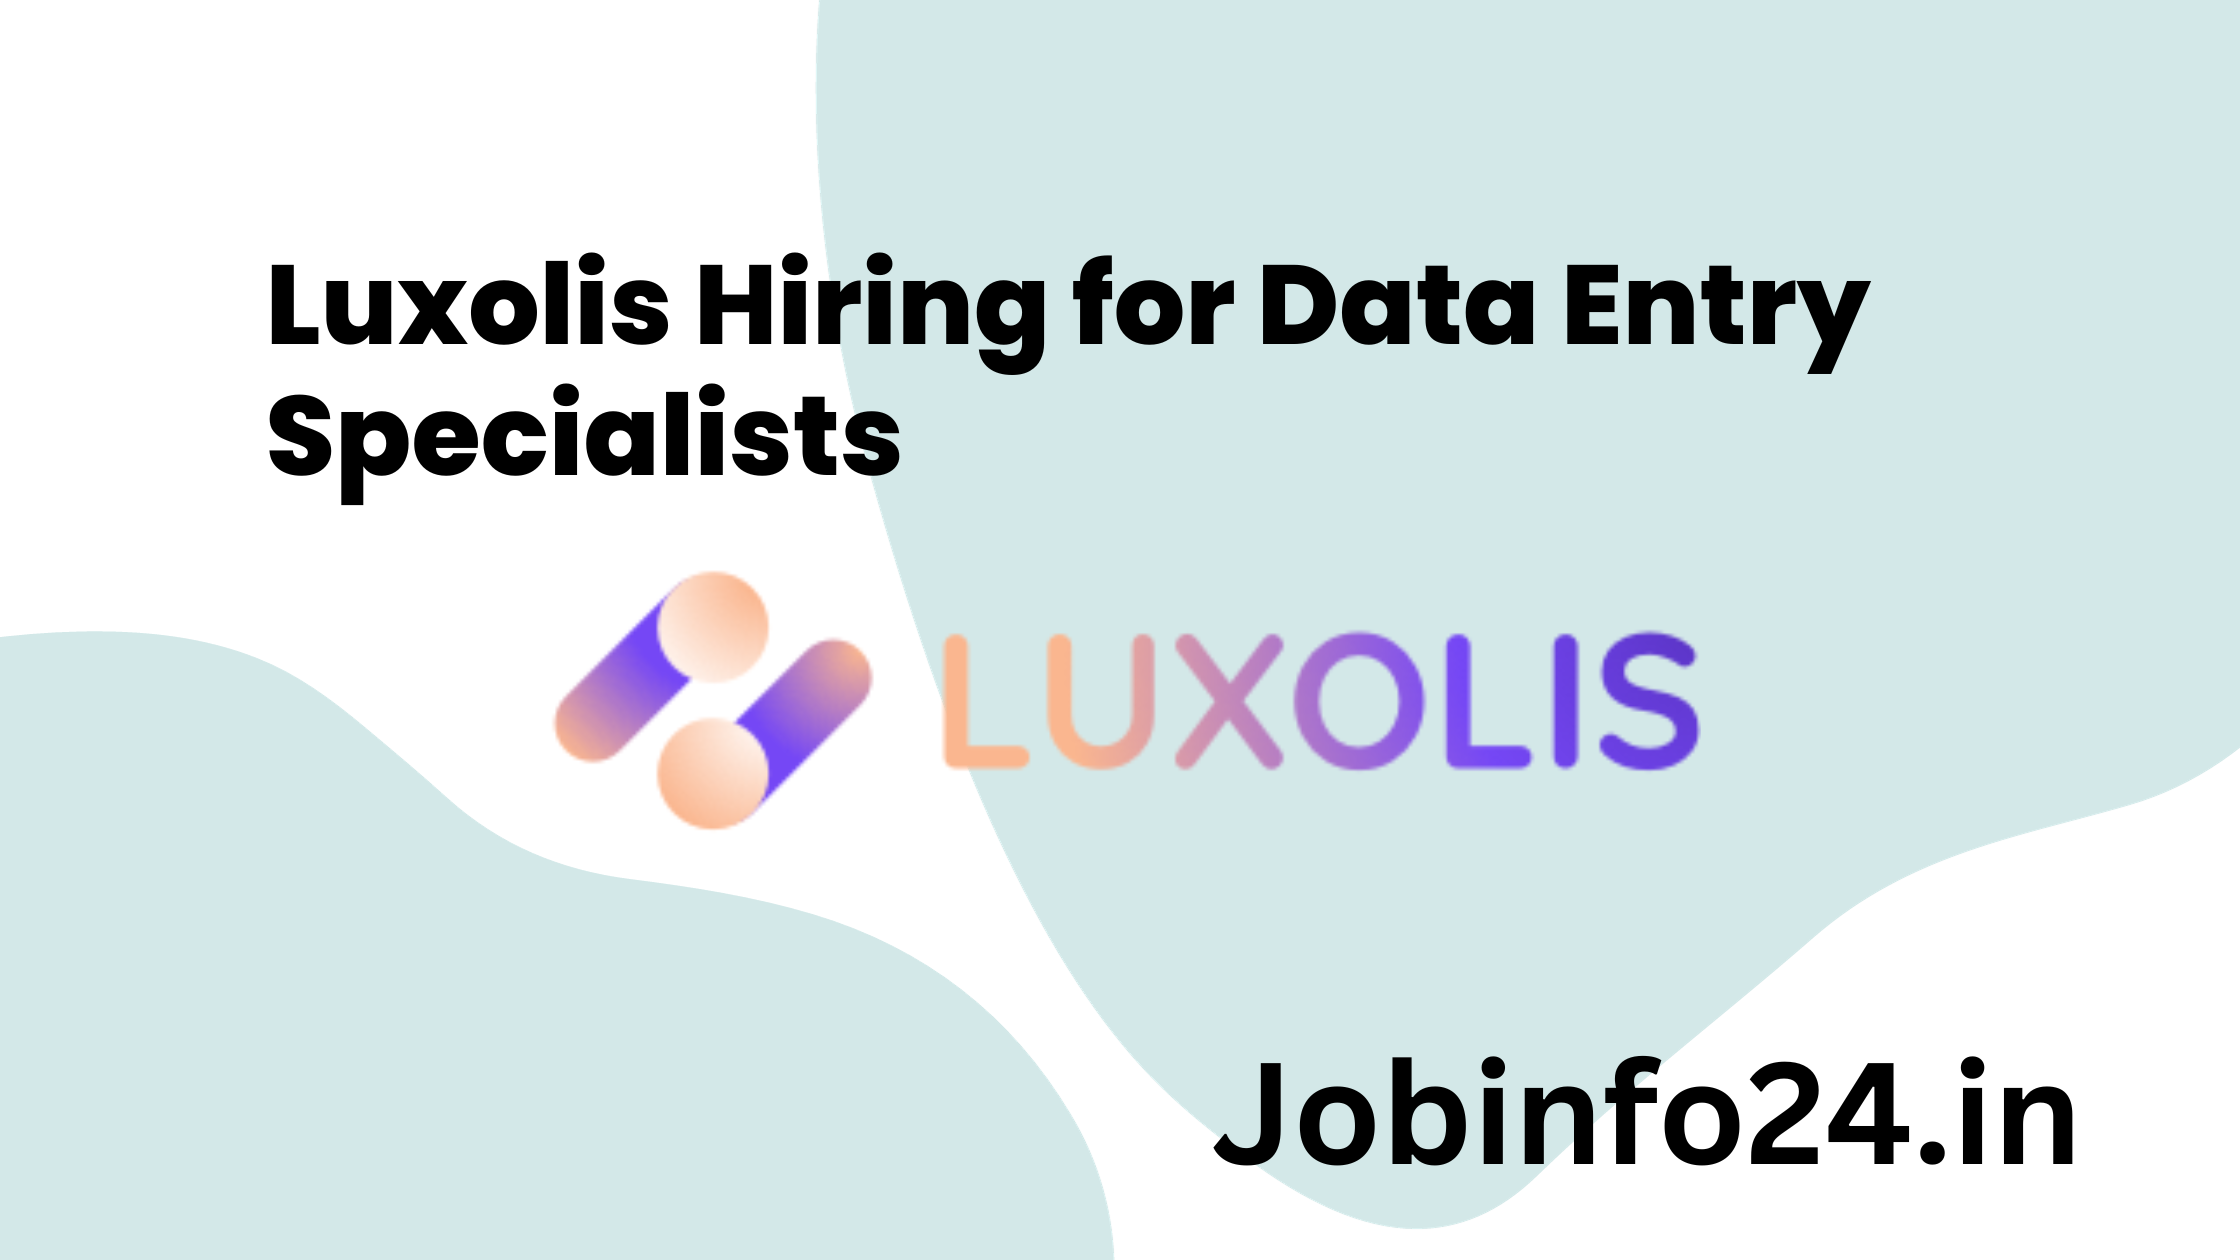 Luxolis Hiring for Data Entry Specialists